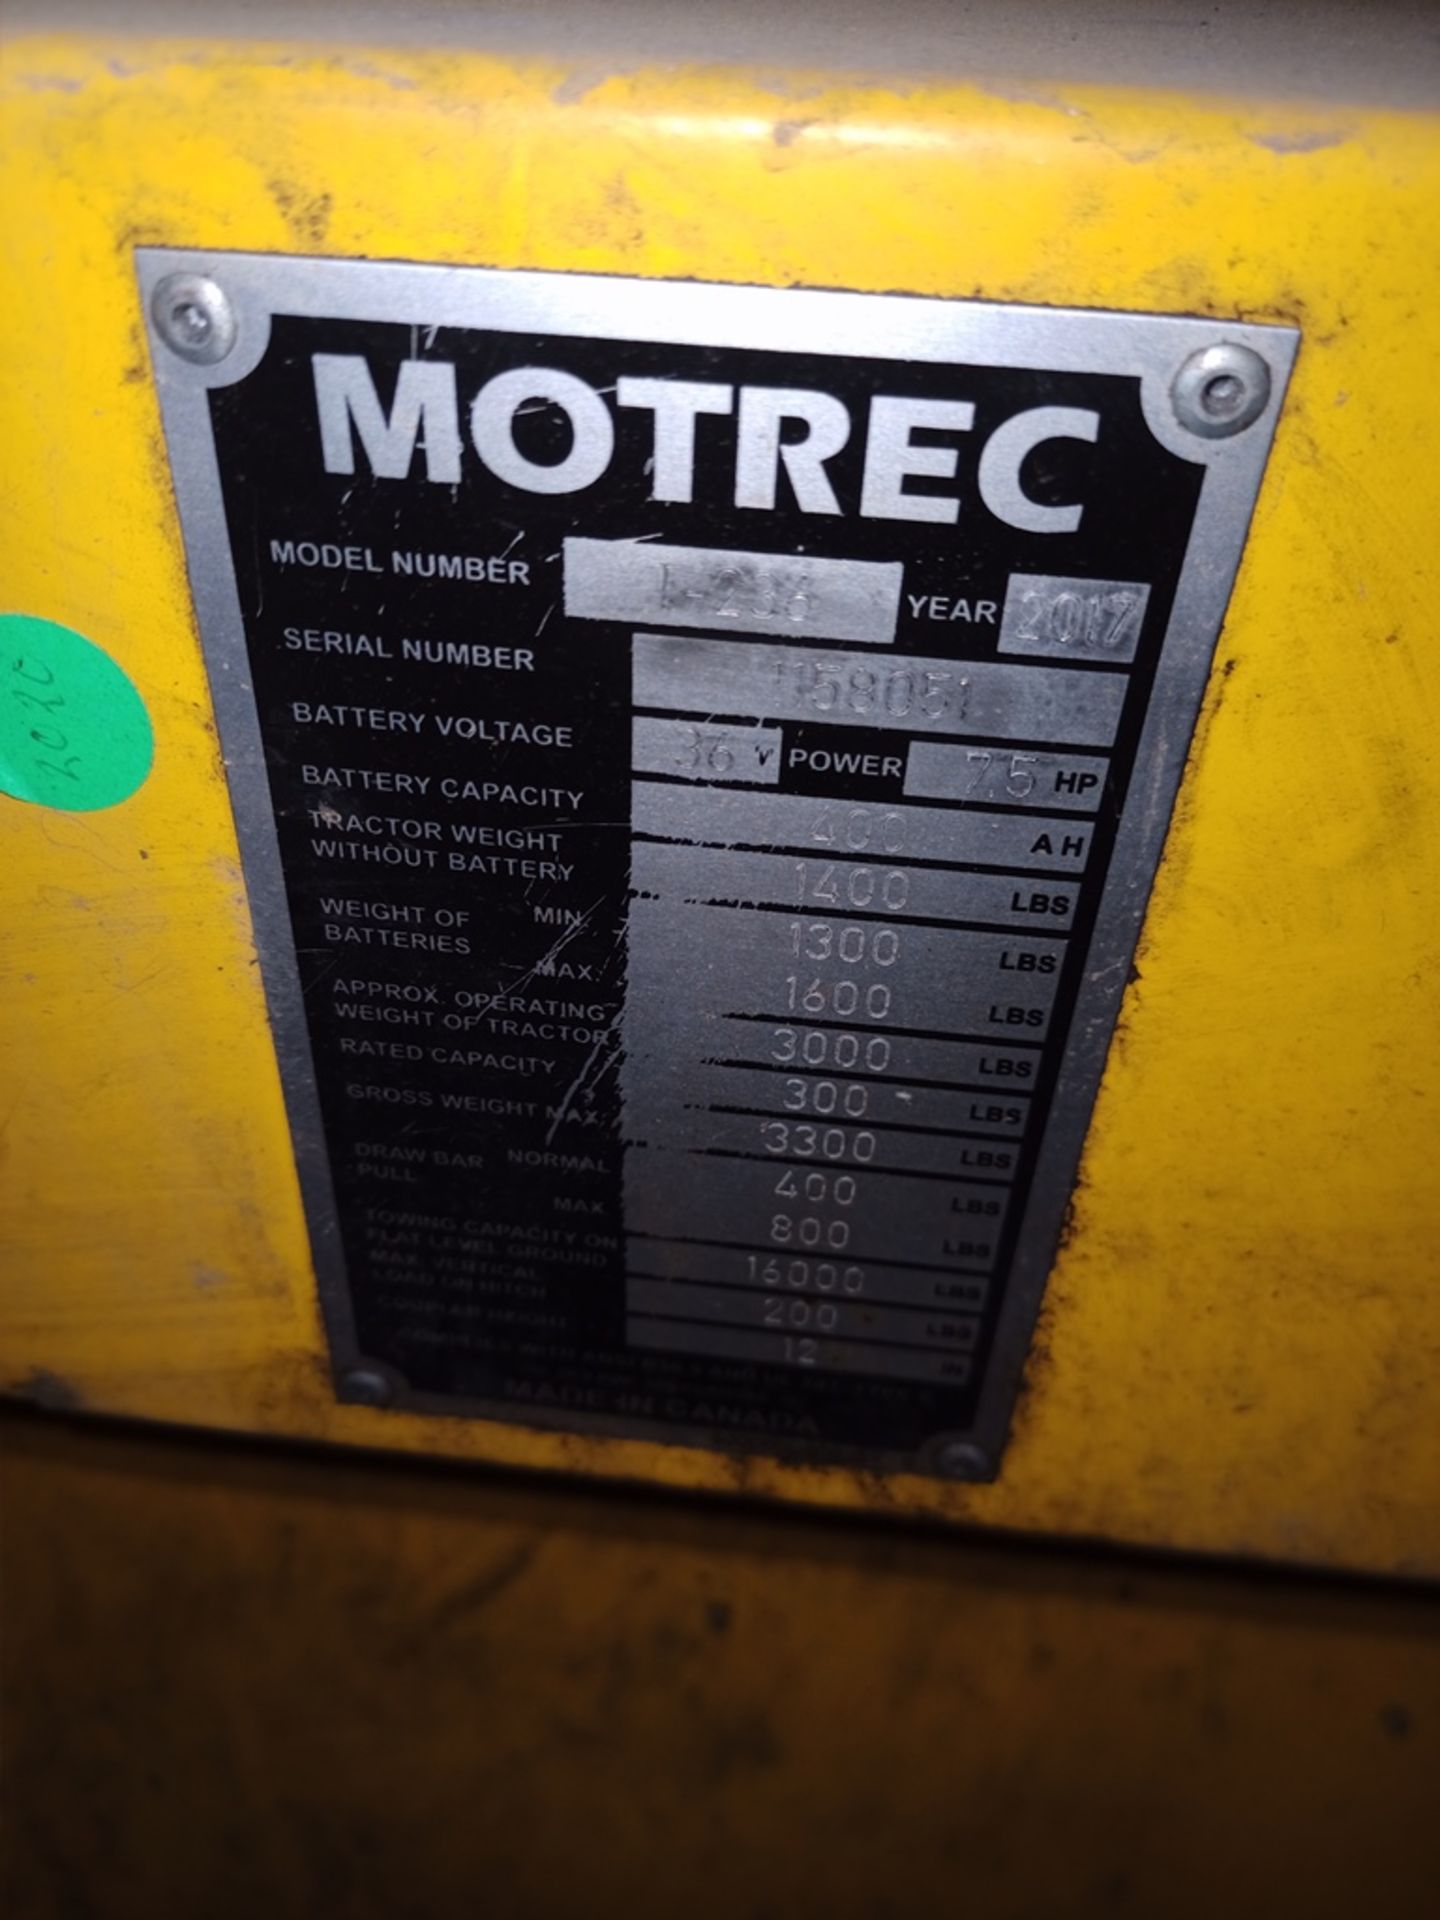 Motrec electric Tow tractor, Model MT-236, S/N 1158051, Year 2017 - Image 22 of 24